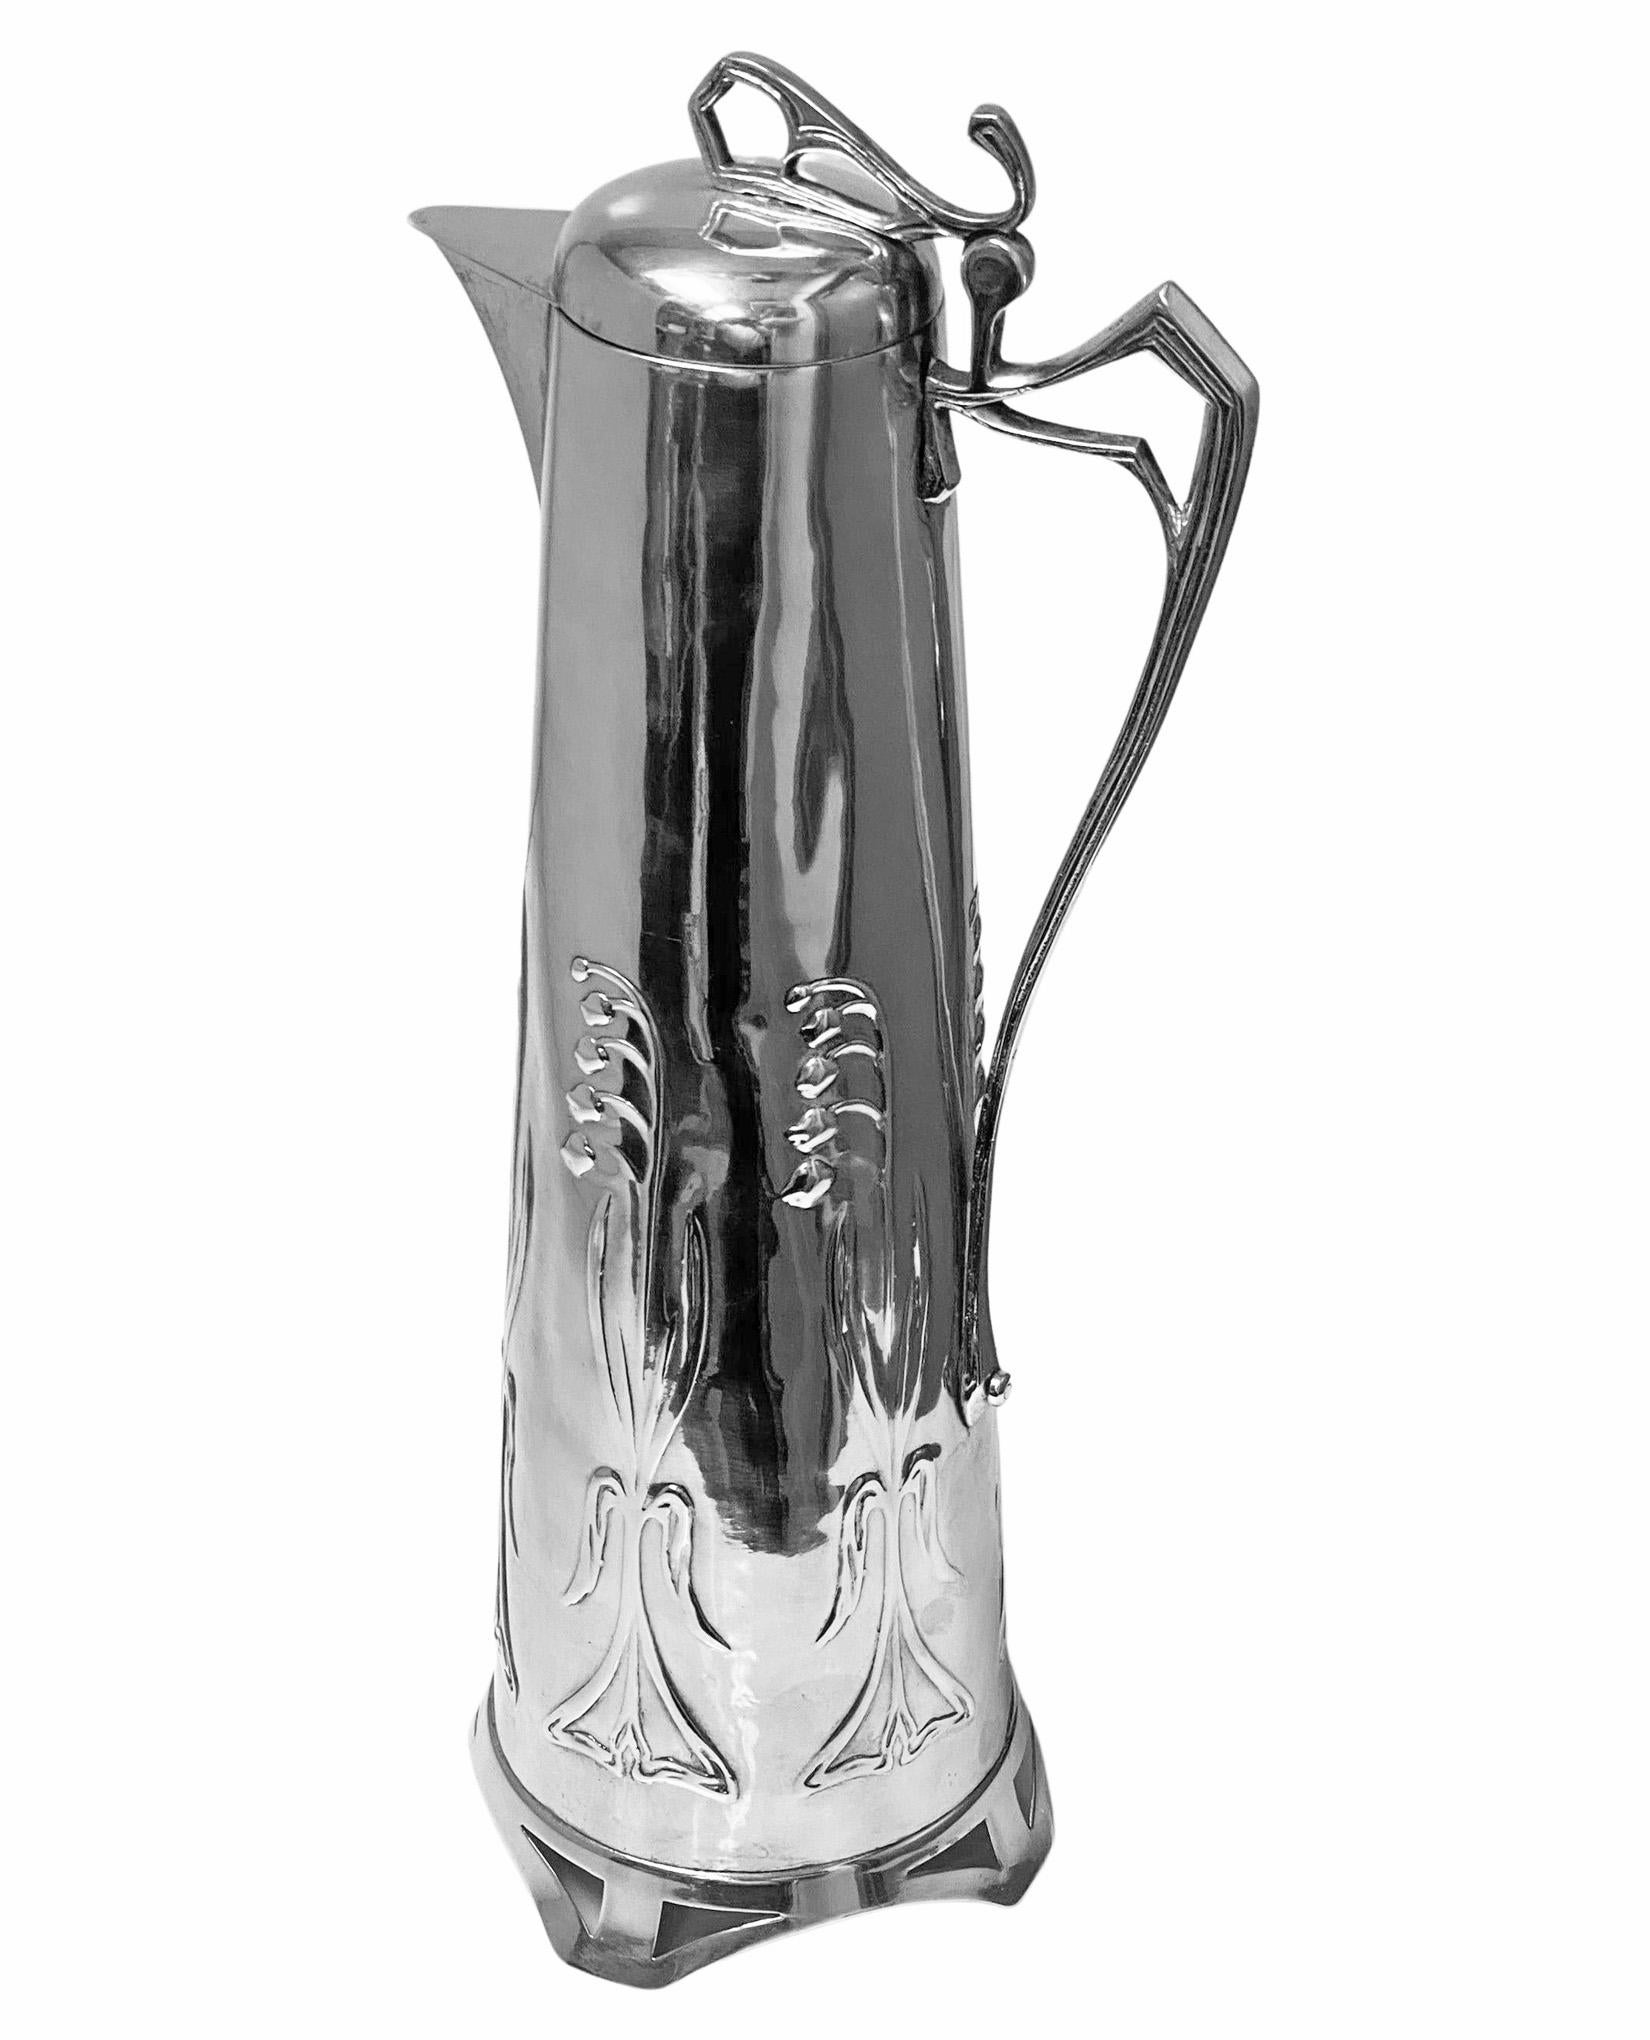 Art Nouveau Jugendstil Pewter wine or water pitcher, C.1900, probably Austrian. Art Nouveau lily of the valley decoration, slightly tapered on four bracket like conjoined supports base, stylized handle with hinged cover conforming in design. Stamped